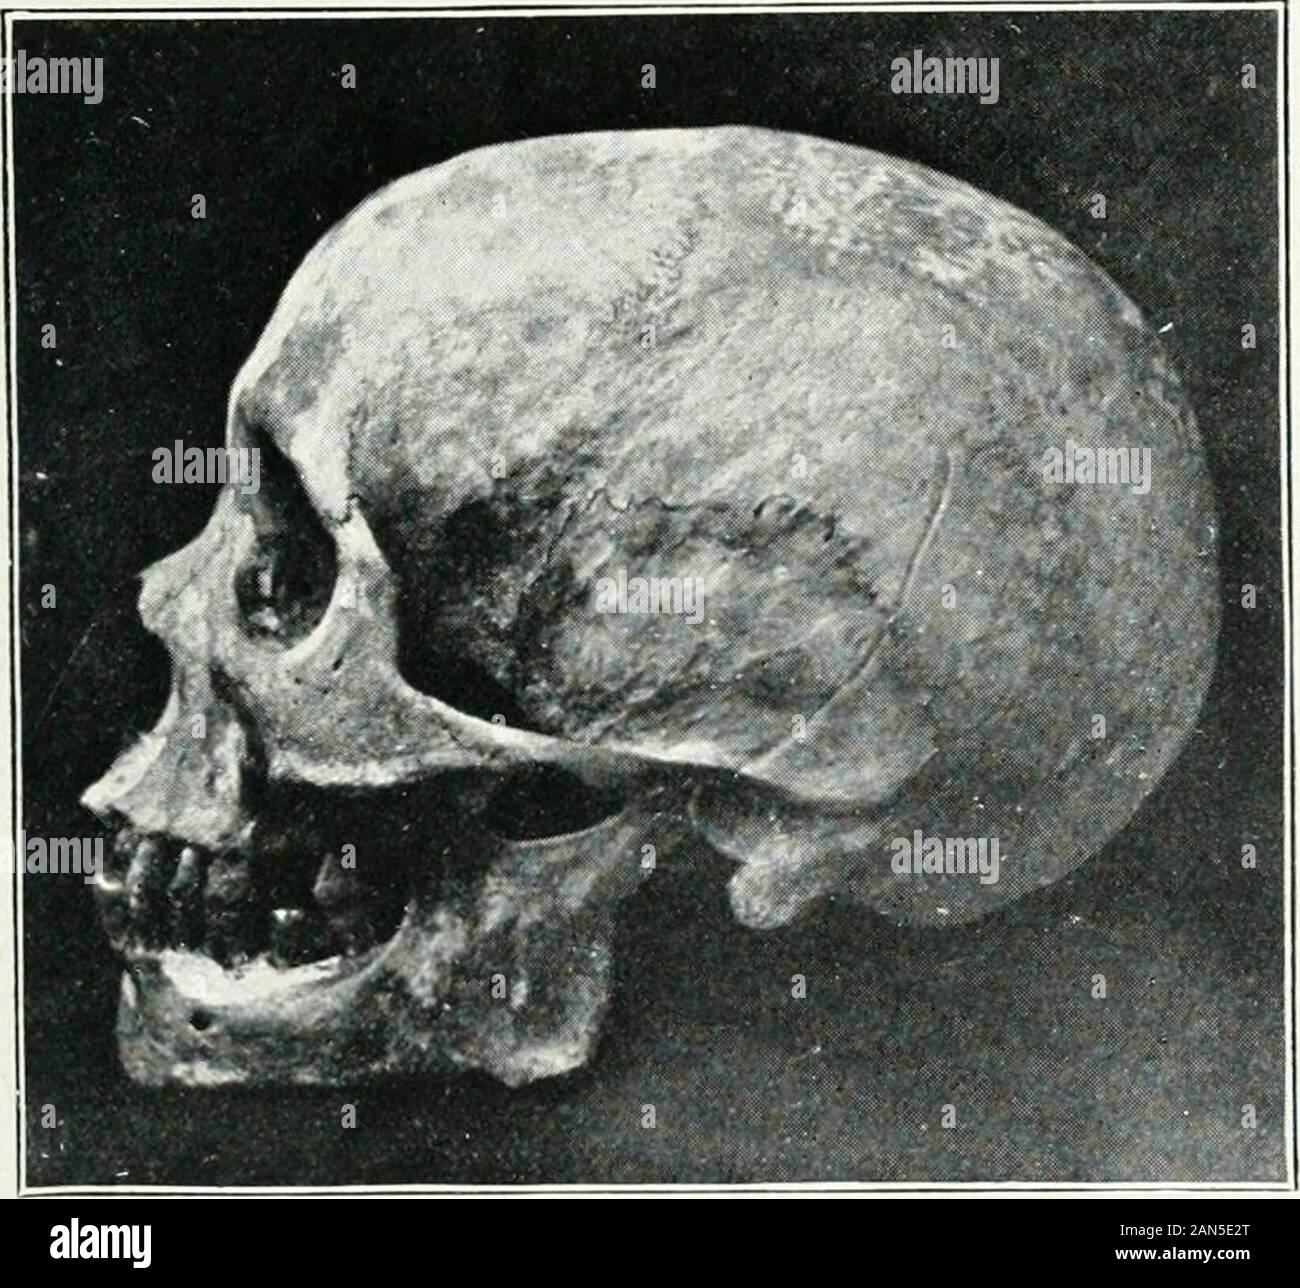 Pagan Races Of The Malay Peninsula Skcat Collection Slvull Ok Semang Skeleton As Viewed From Above Procured At Ulii Siontr Kedah Skcat Collection Skull Of Semang Skeleton Side View Belonging To Skeleton Procured At